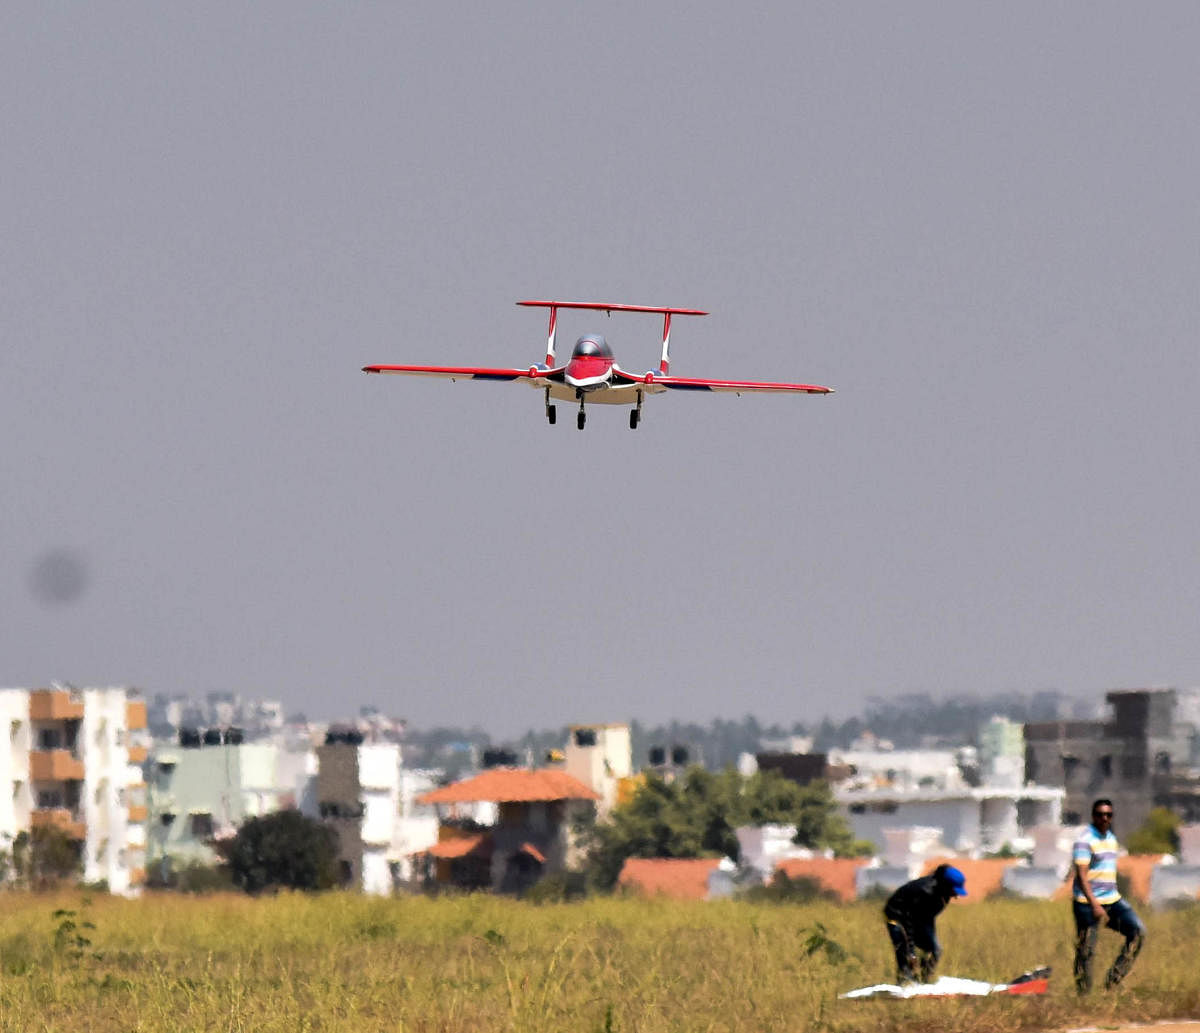 A Jet turbine UAV fly in the Drone Olympics, as part of the Aero India show 2019, at Jakkur Aerodrome in Bengaluru. (DH photo)